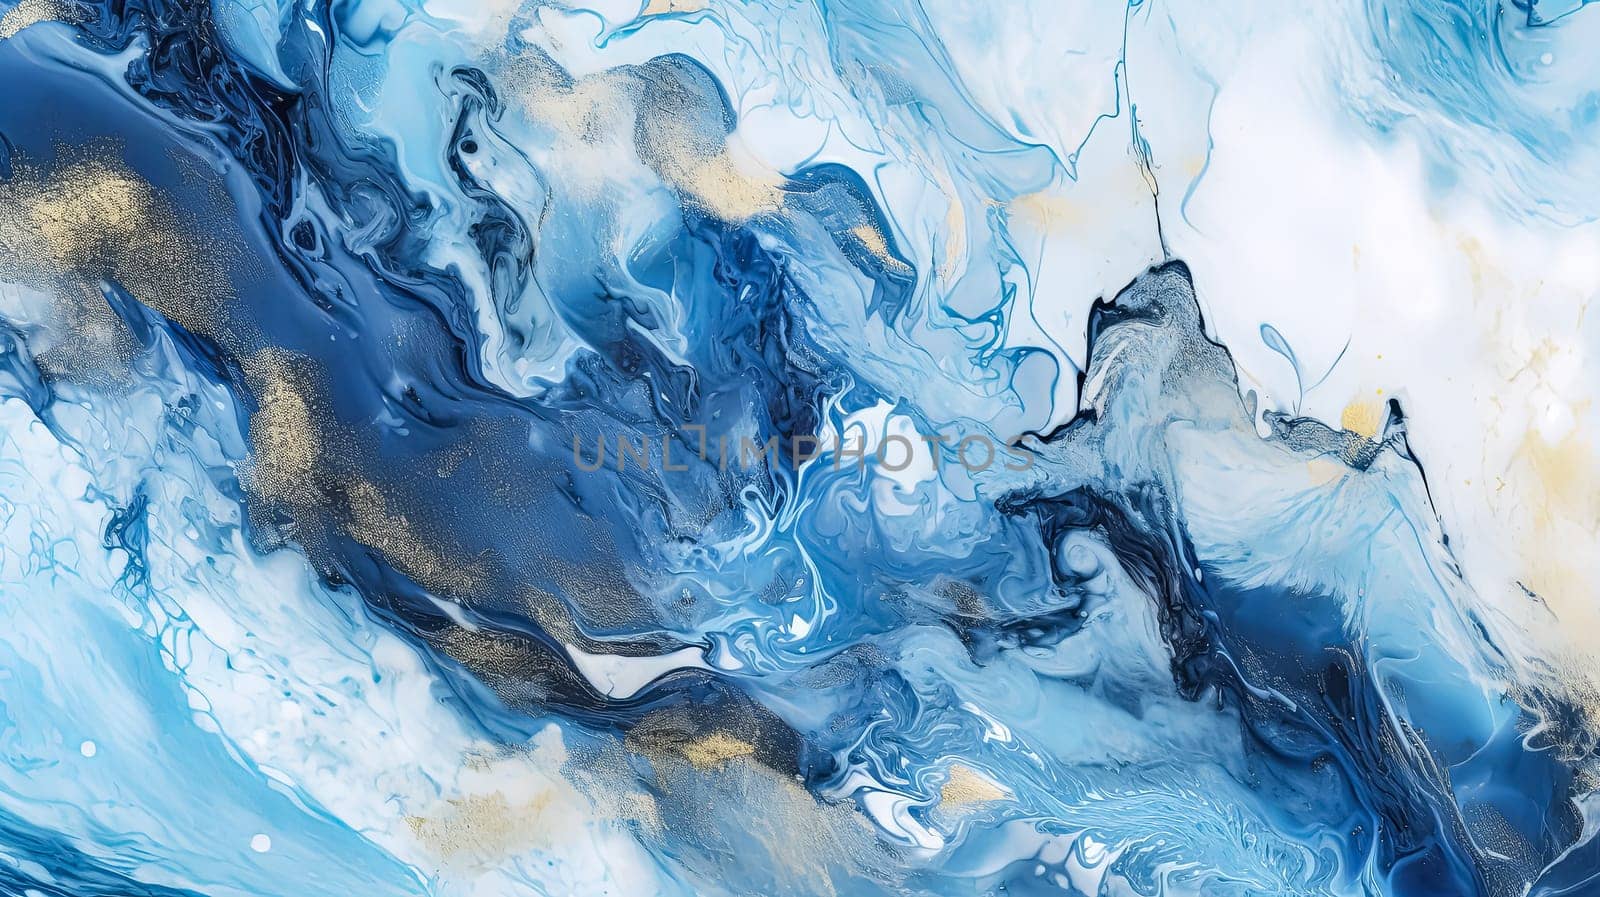 A blue ocean with gold accents. The blue and gold colors create a sense of depth and movement, as if the waves are constantly shifting and changing. The painting evokes a feeling of calmness